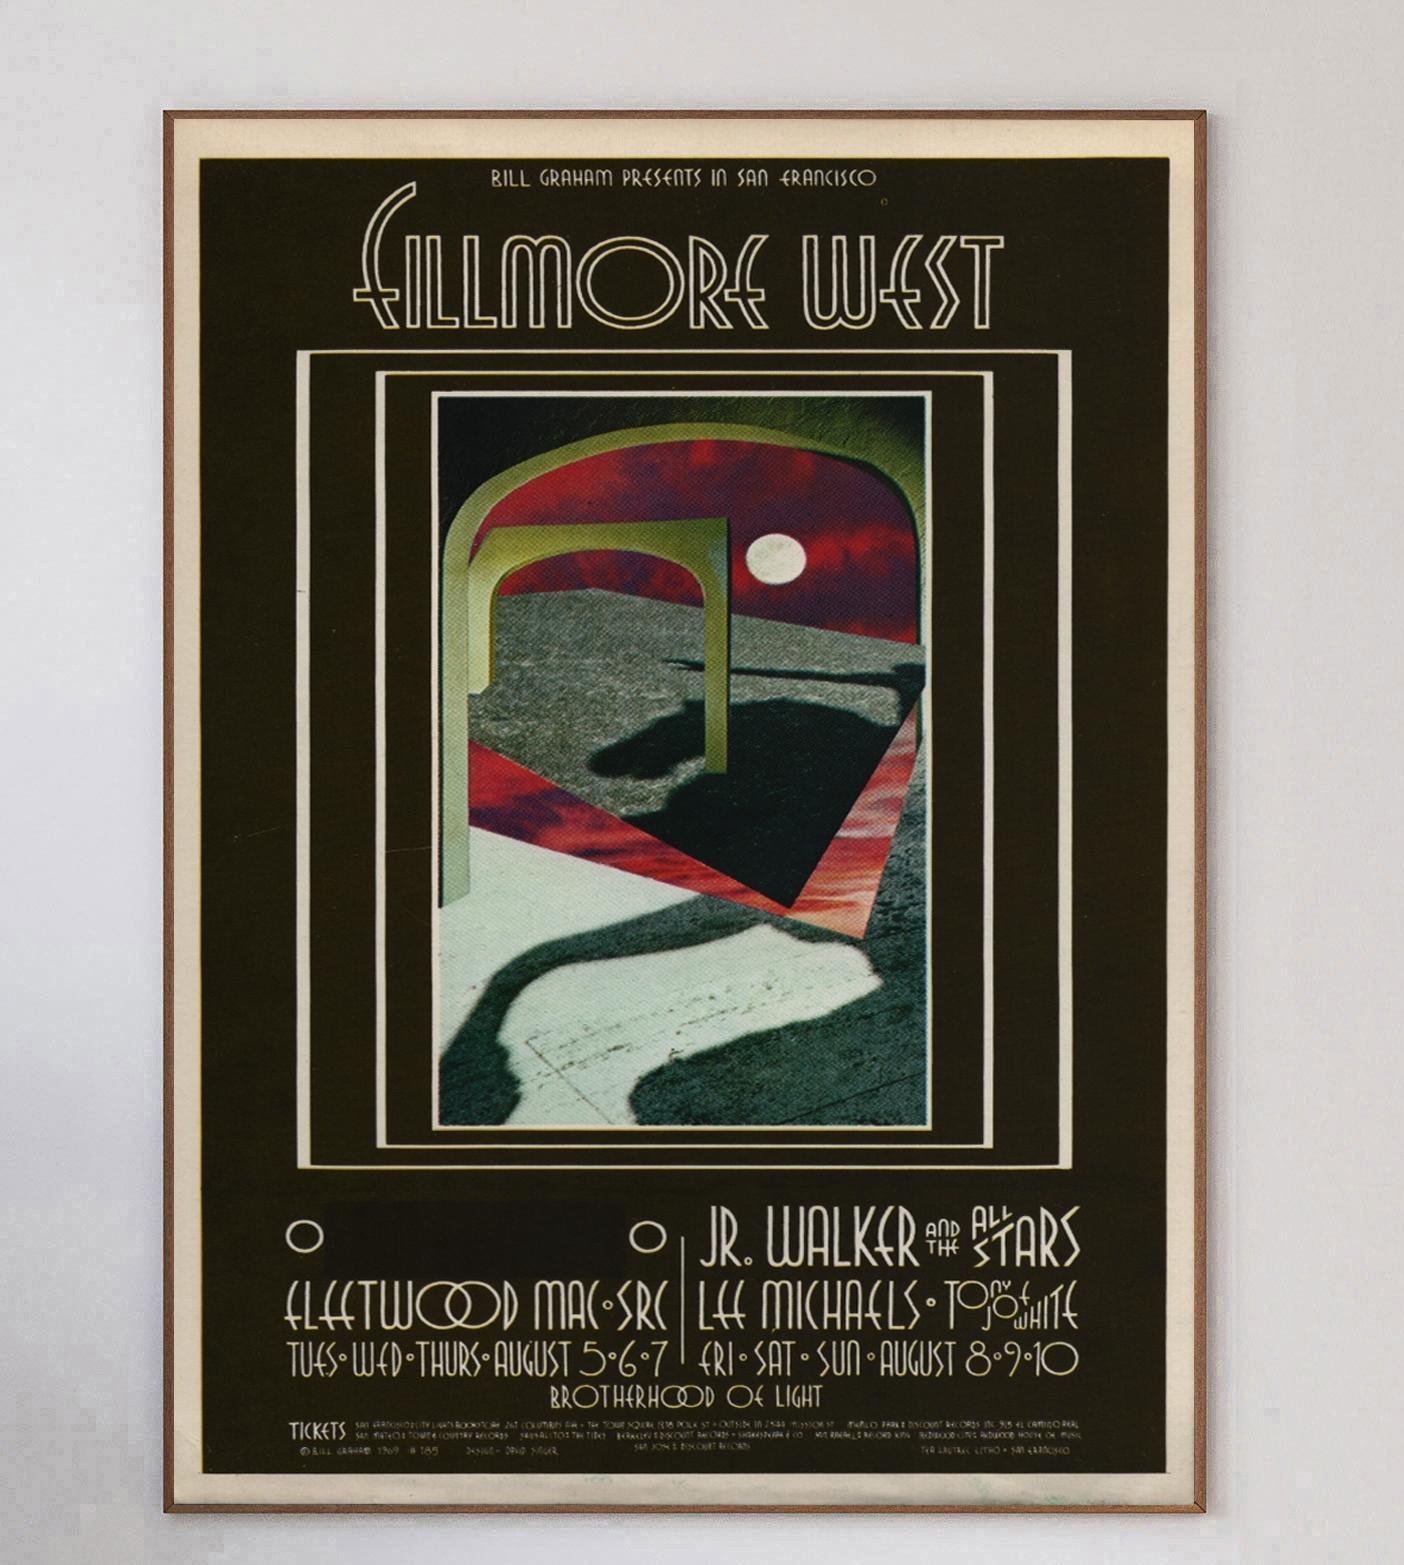 Designed by concert poster artist David Singer, this beautiful poster was created in 1969 to promote a live concert of Fleetwood Mac at the world famous Fillmore West in San Francisco. Bill Graham events such as this were well known for their now